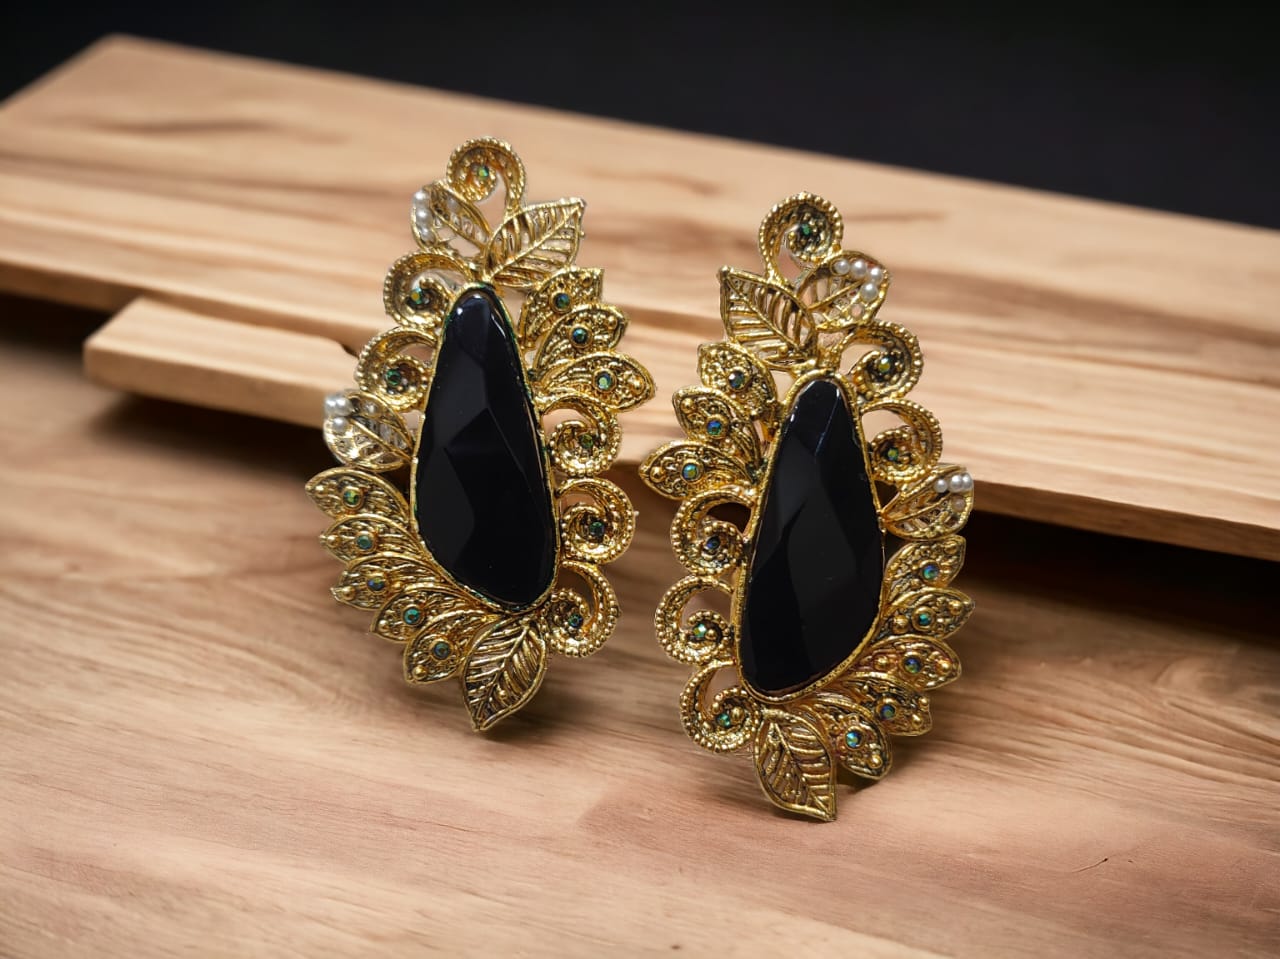 Designer collection  Handmade doublet stone big size earrings